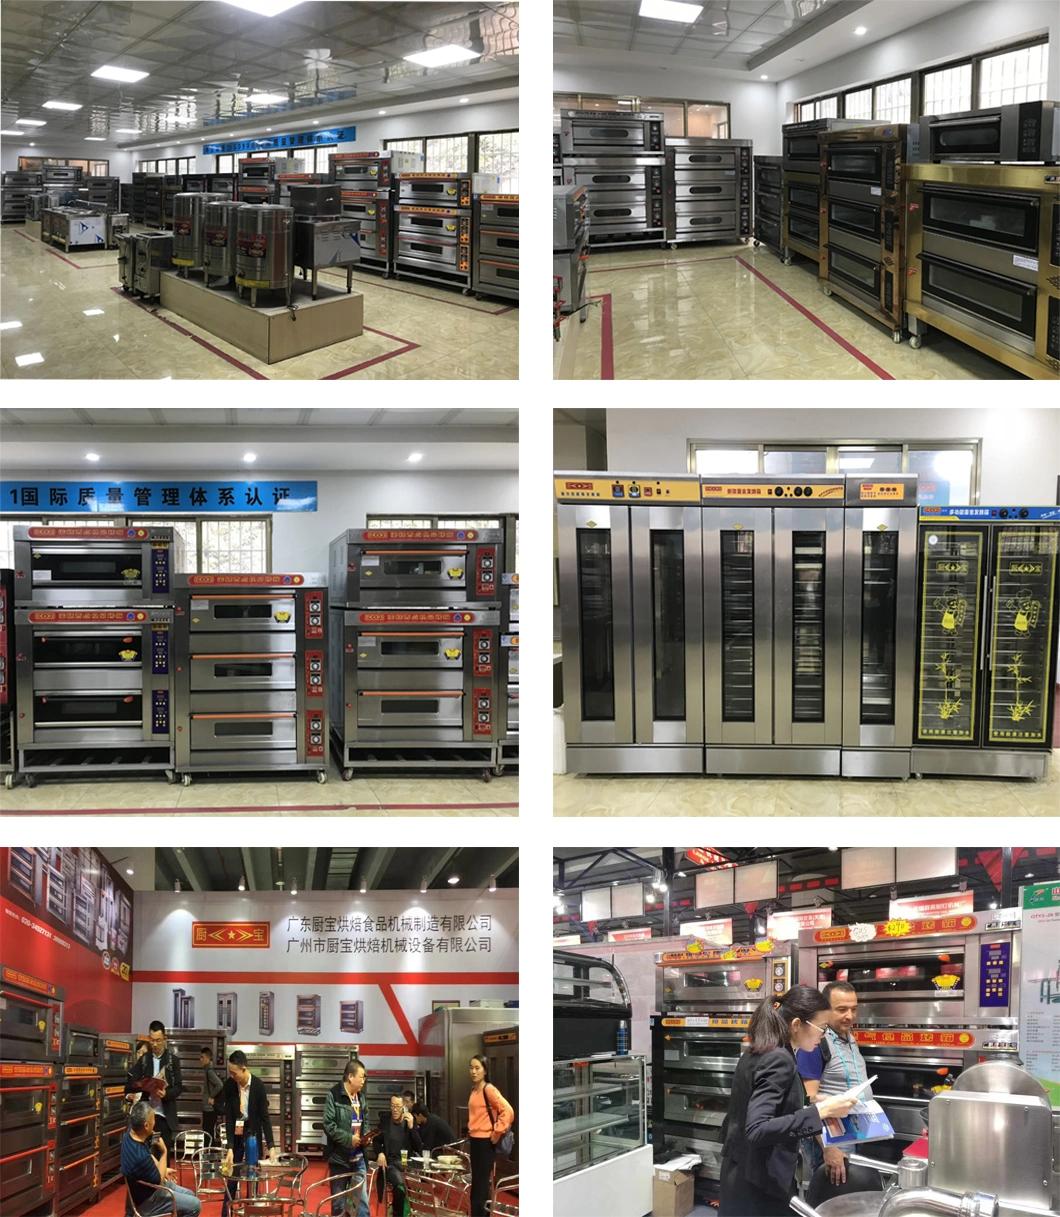 Commercial Restaurant Kitchen 1 Deck 2 Trays Luxury Gas Oven for Baking Equipment Bakery Machine Food Equipment with Computer Controller Oven